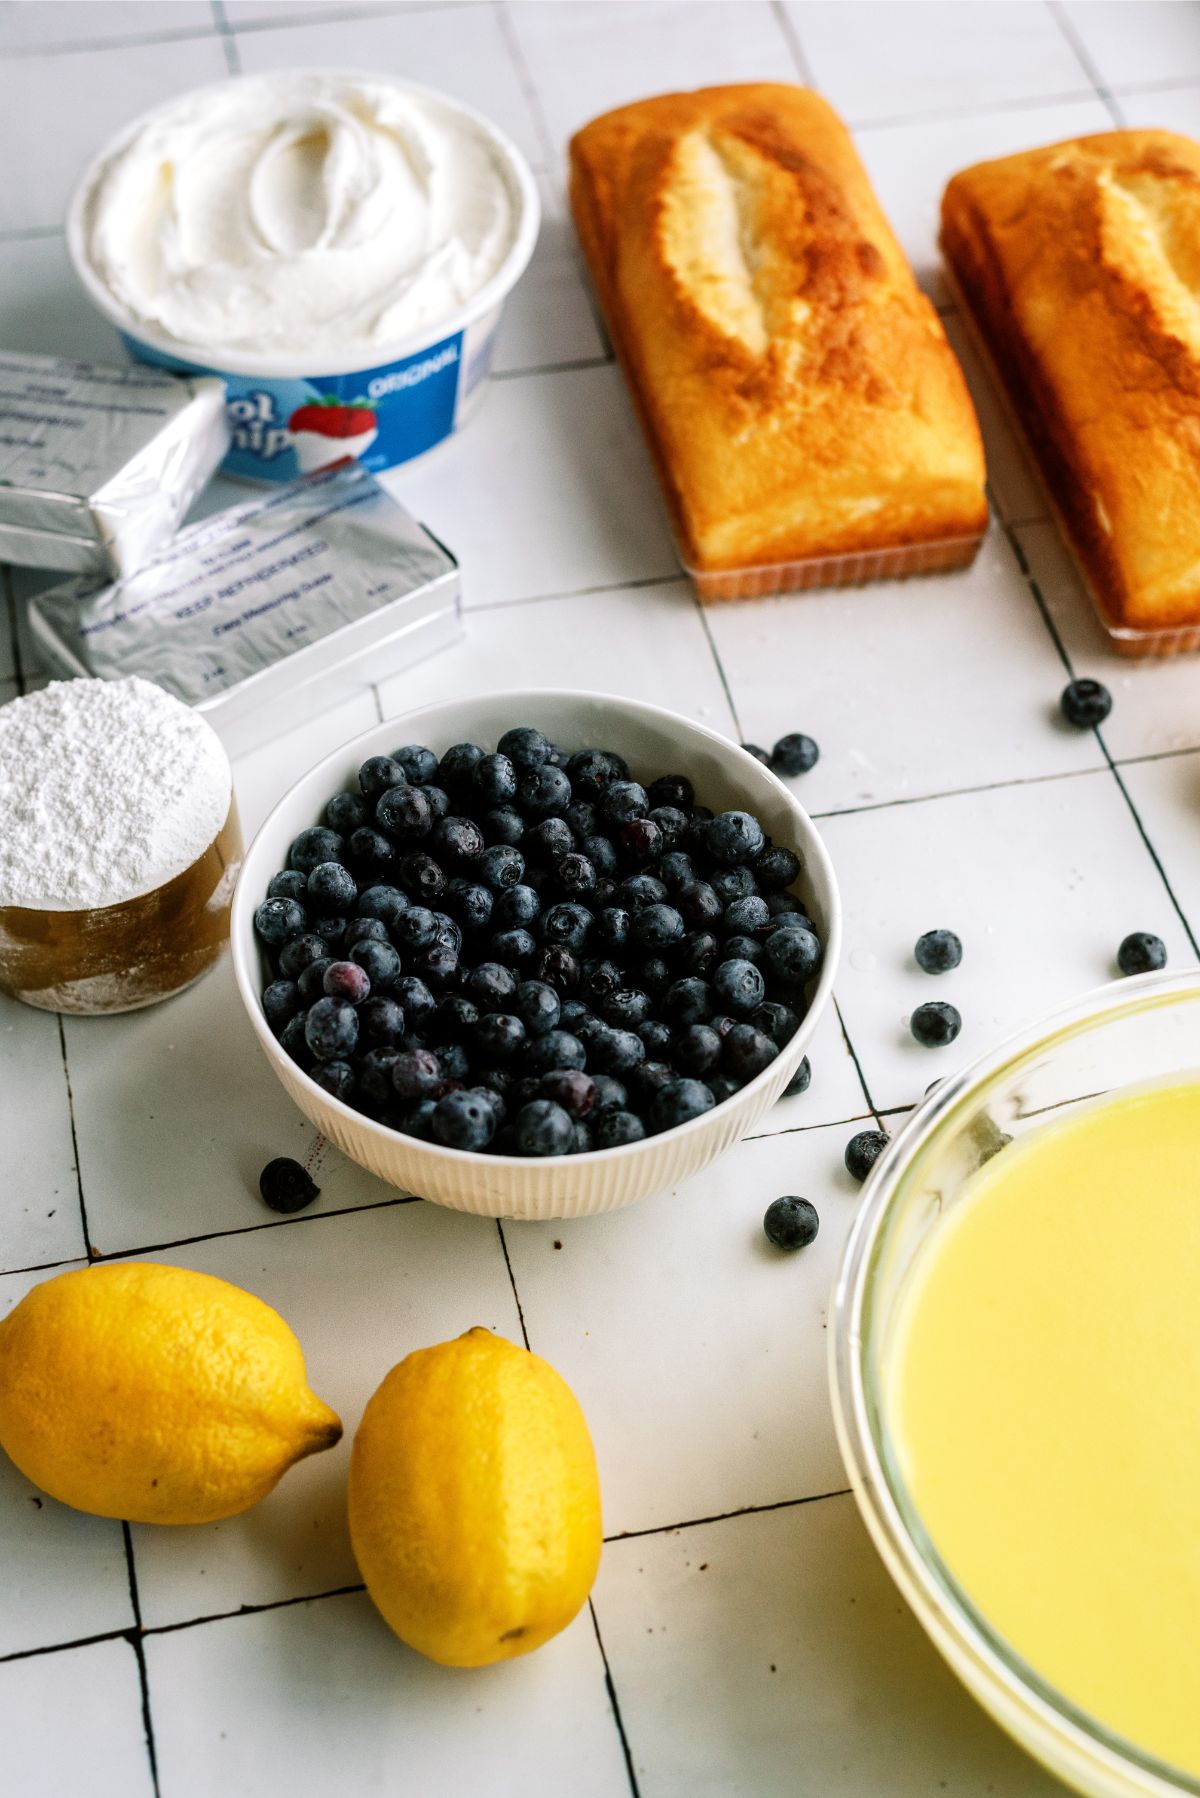 Ingredients needed to make Lemon Blueberry Trifle